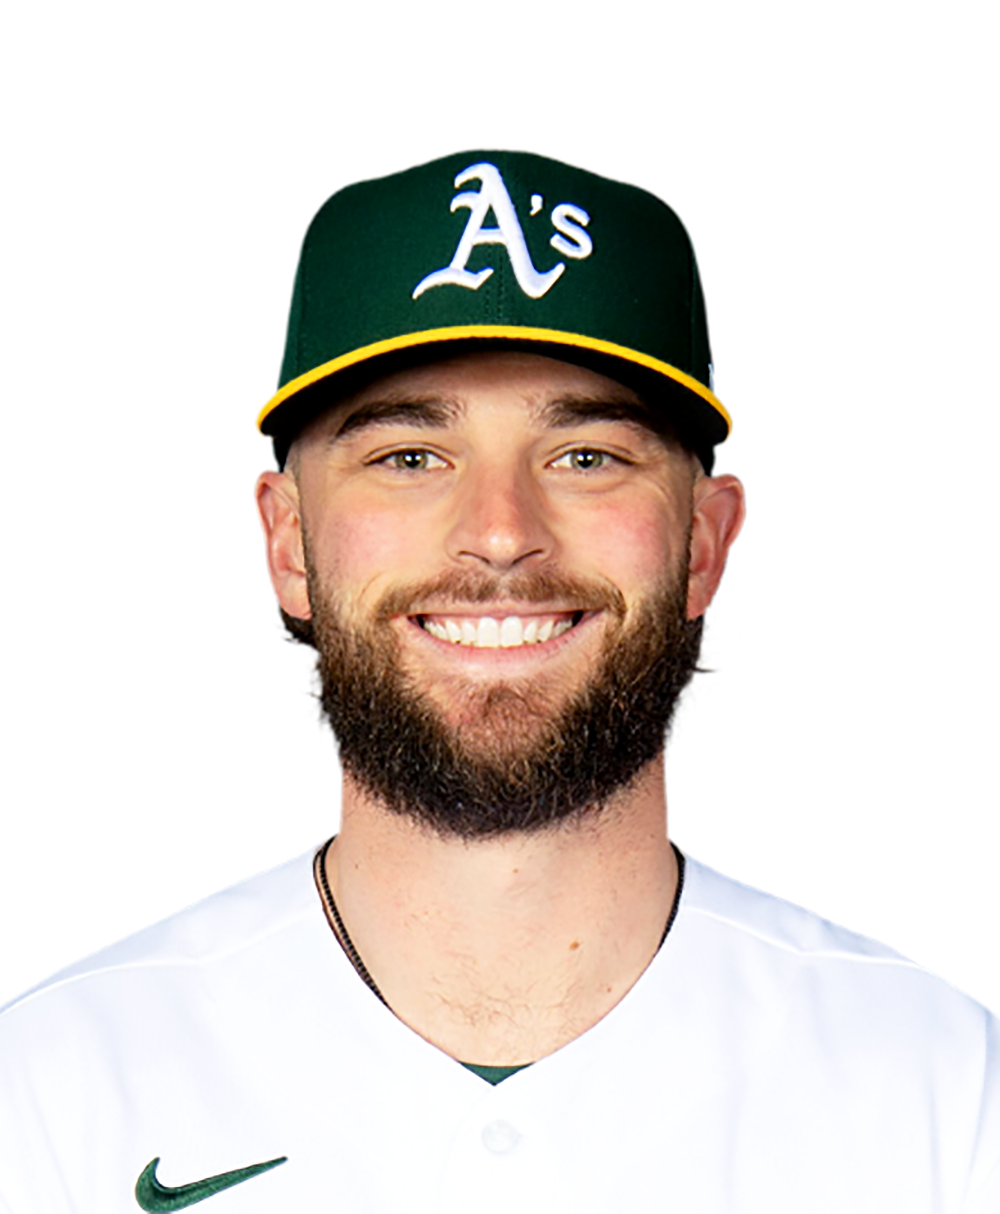 A's rebuilding again going into 2022